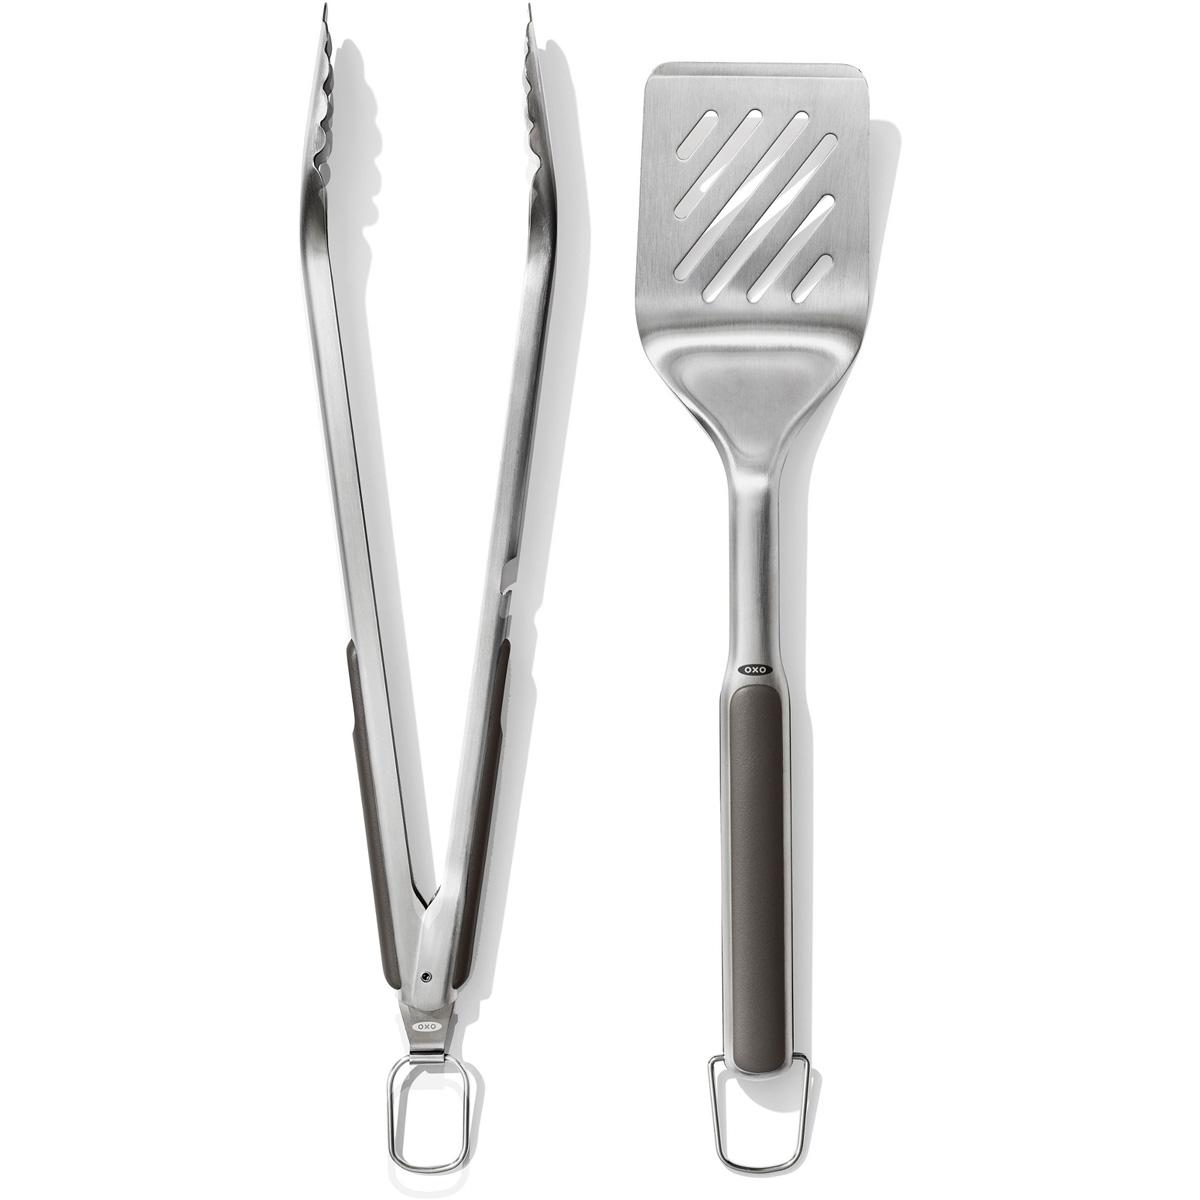 OXO Outdoor Grill Turner and Tongs Set for $11.93